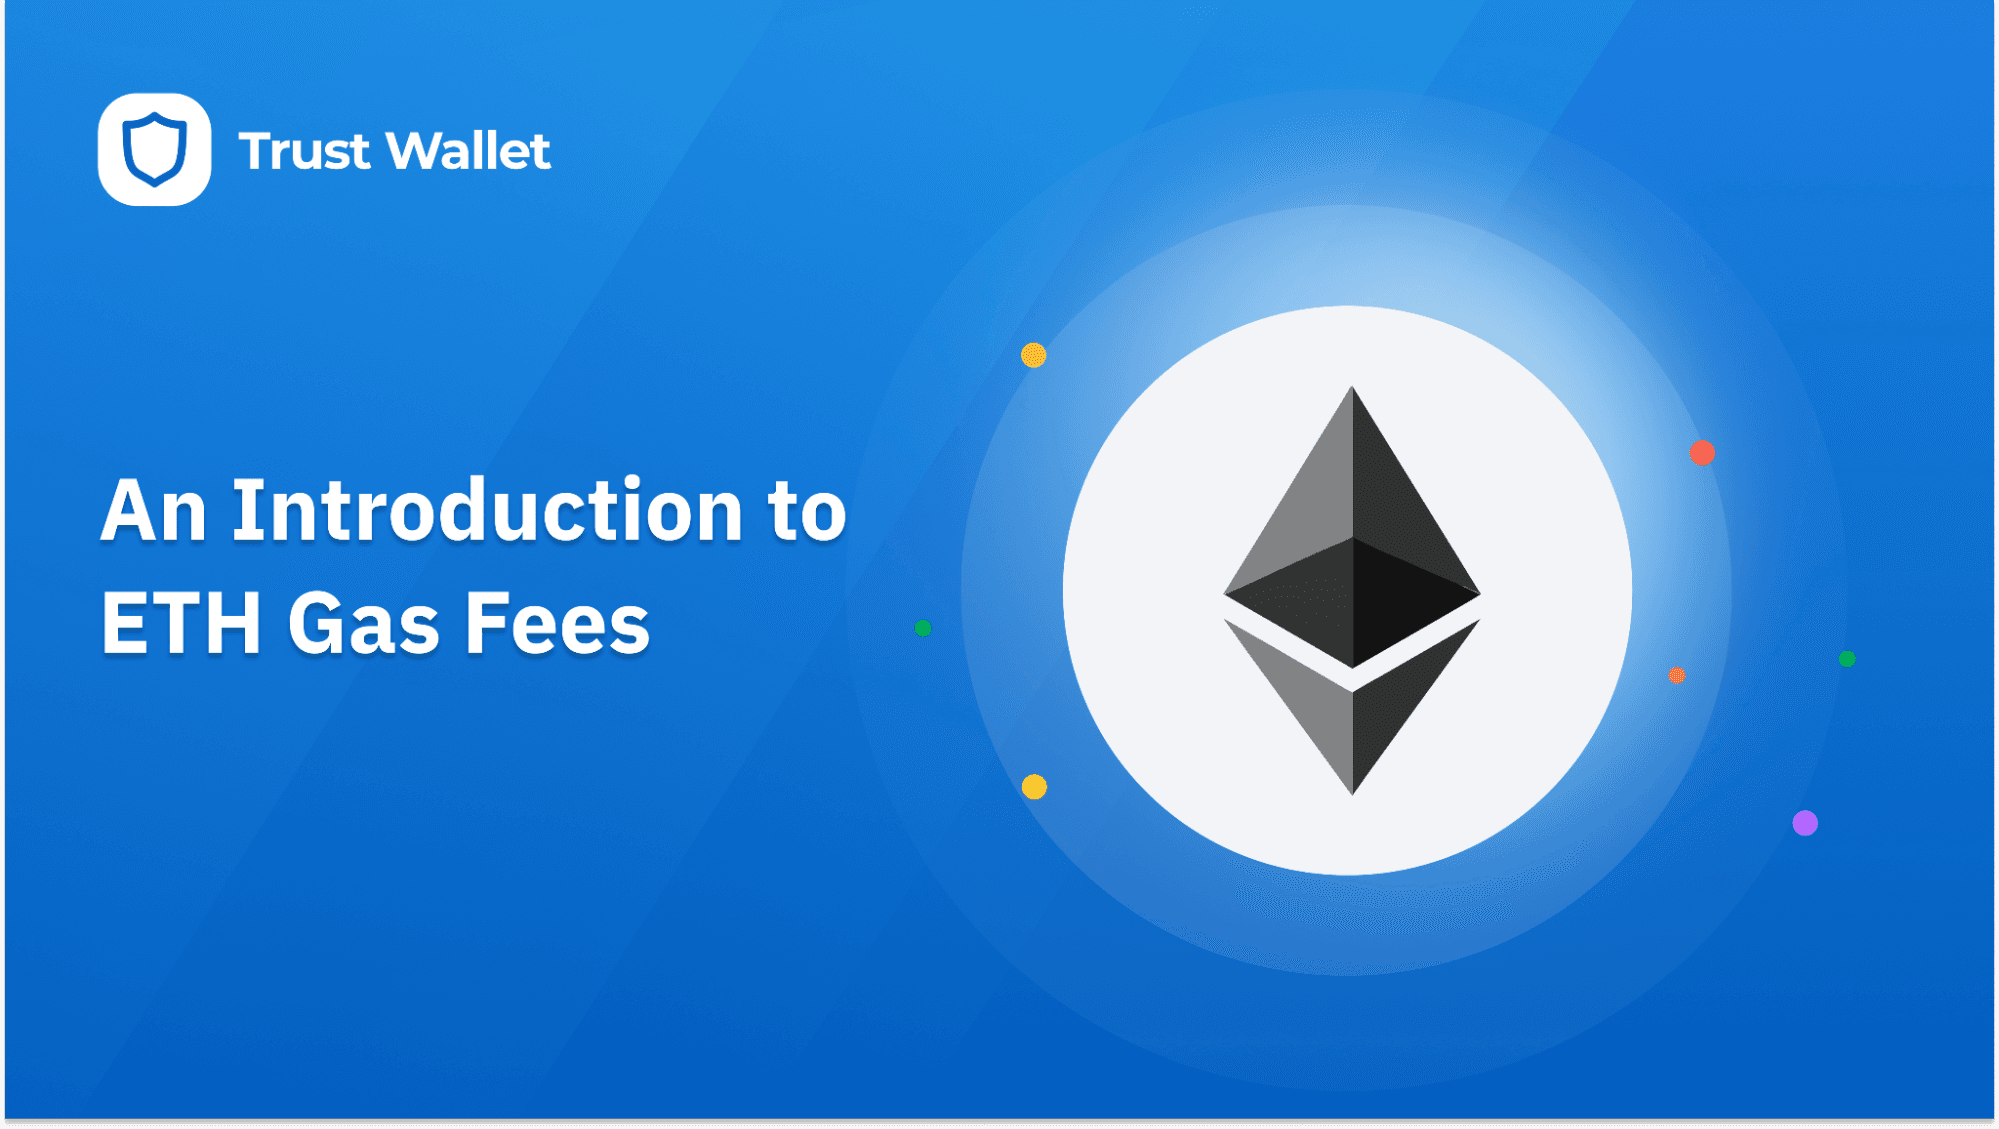 An Introduction to ETH Gas Fees